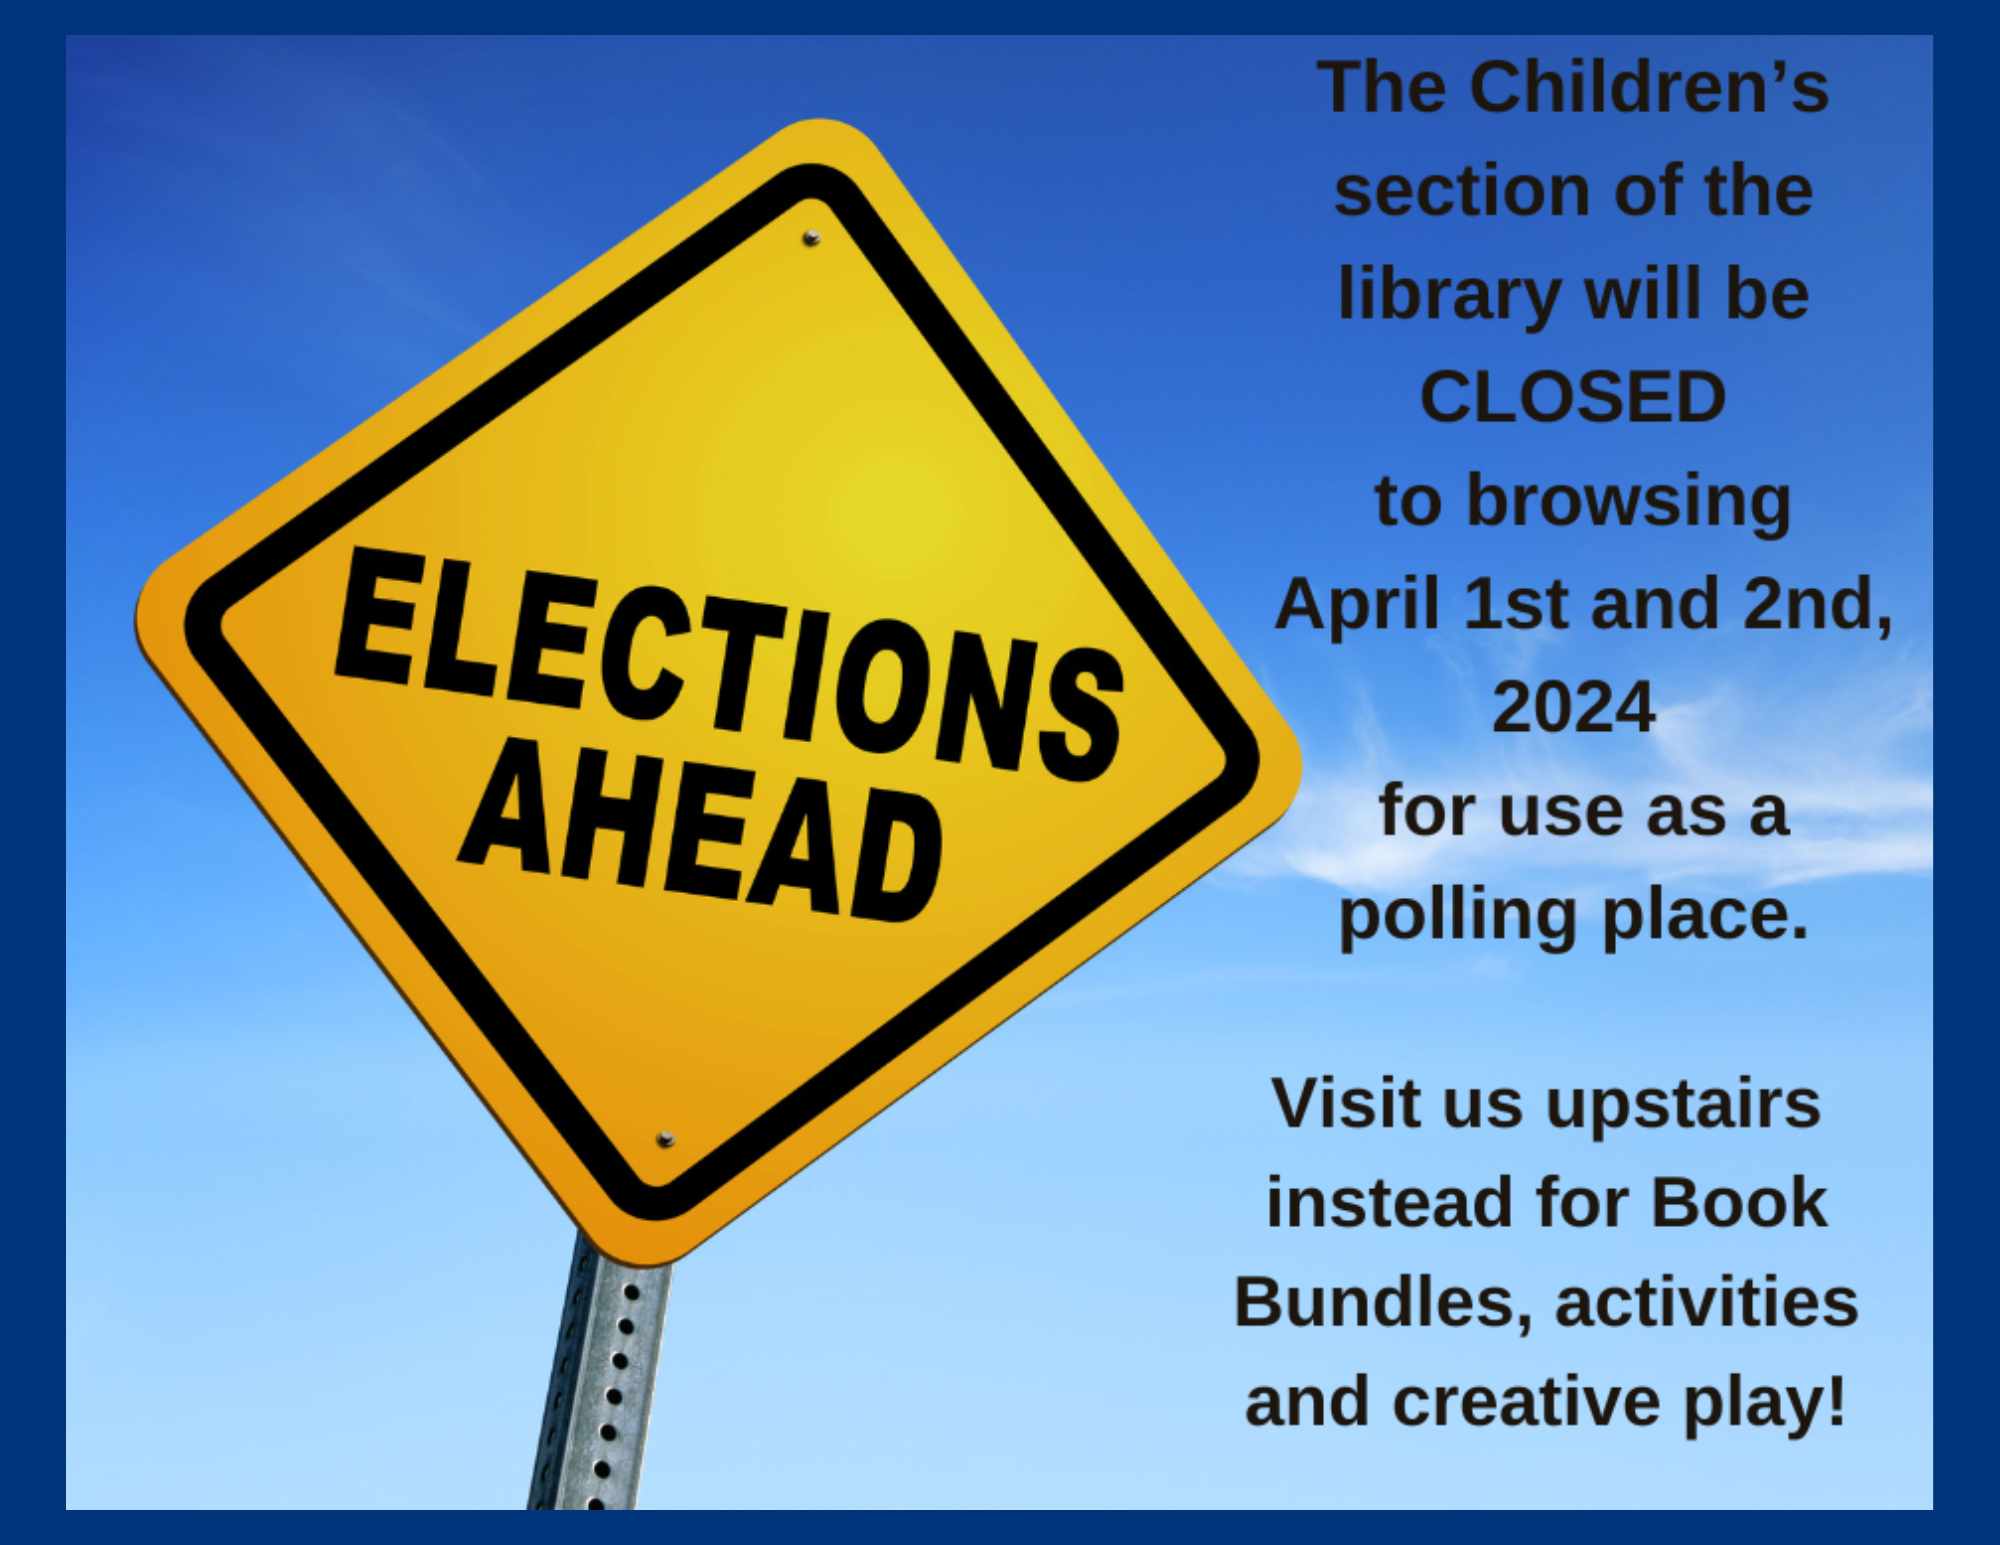 The Children's section of the library will be closed to browsing April 1 and 2 2024 for use as a polling place. Visit us upstairs instead for book bundles, activities and creative play.